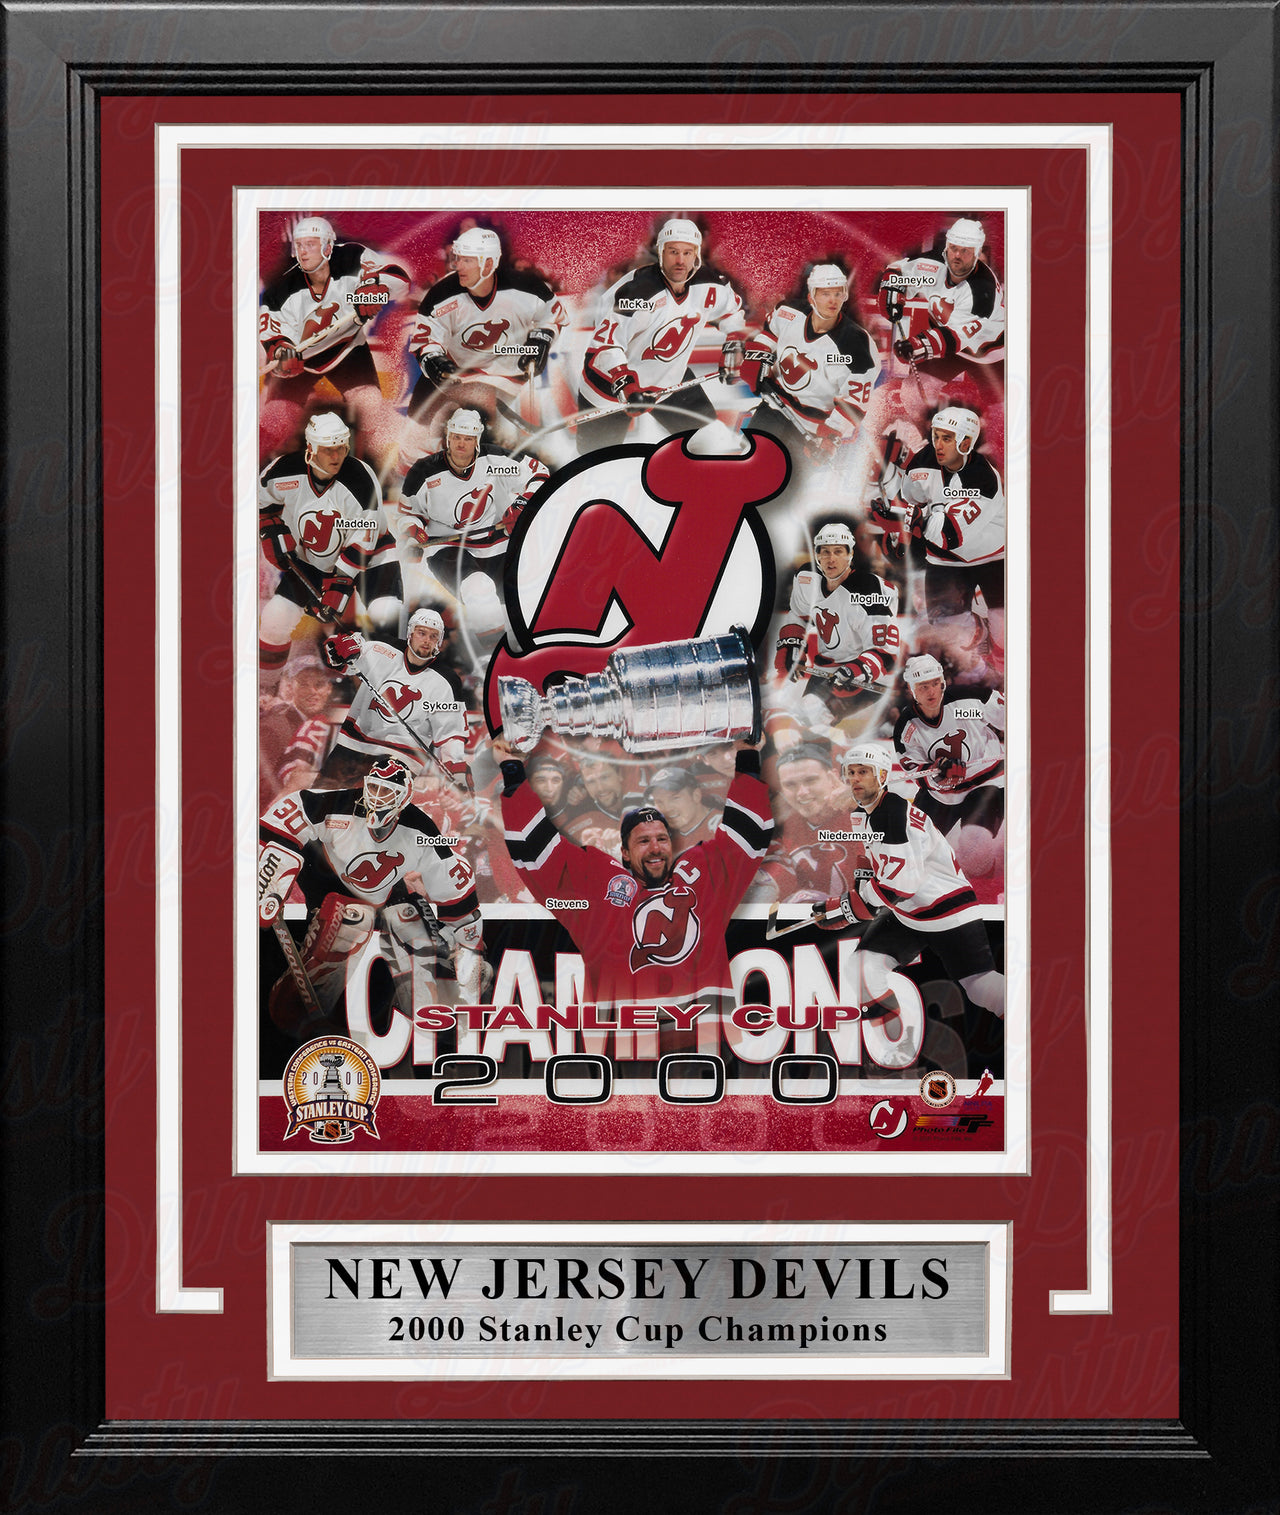 New Jersey Devils 2000 Stanley Cup Champions 8" x 10" Framed Collage Hockey Photo